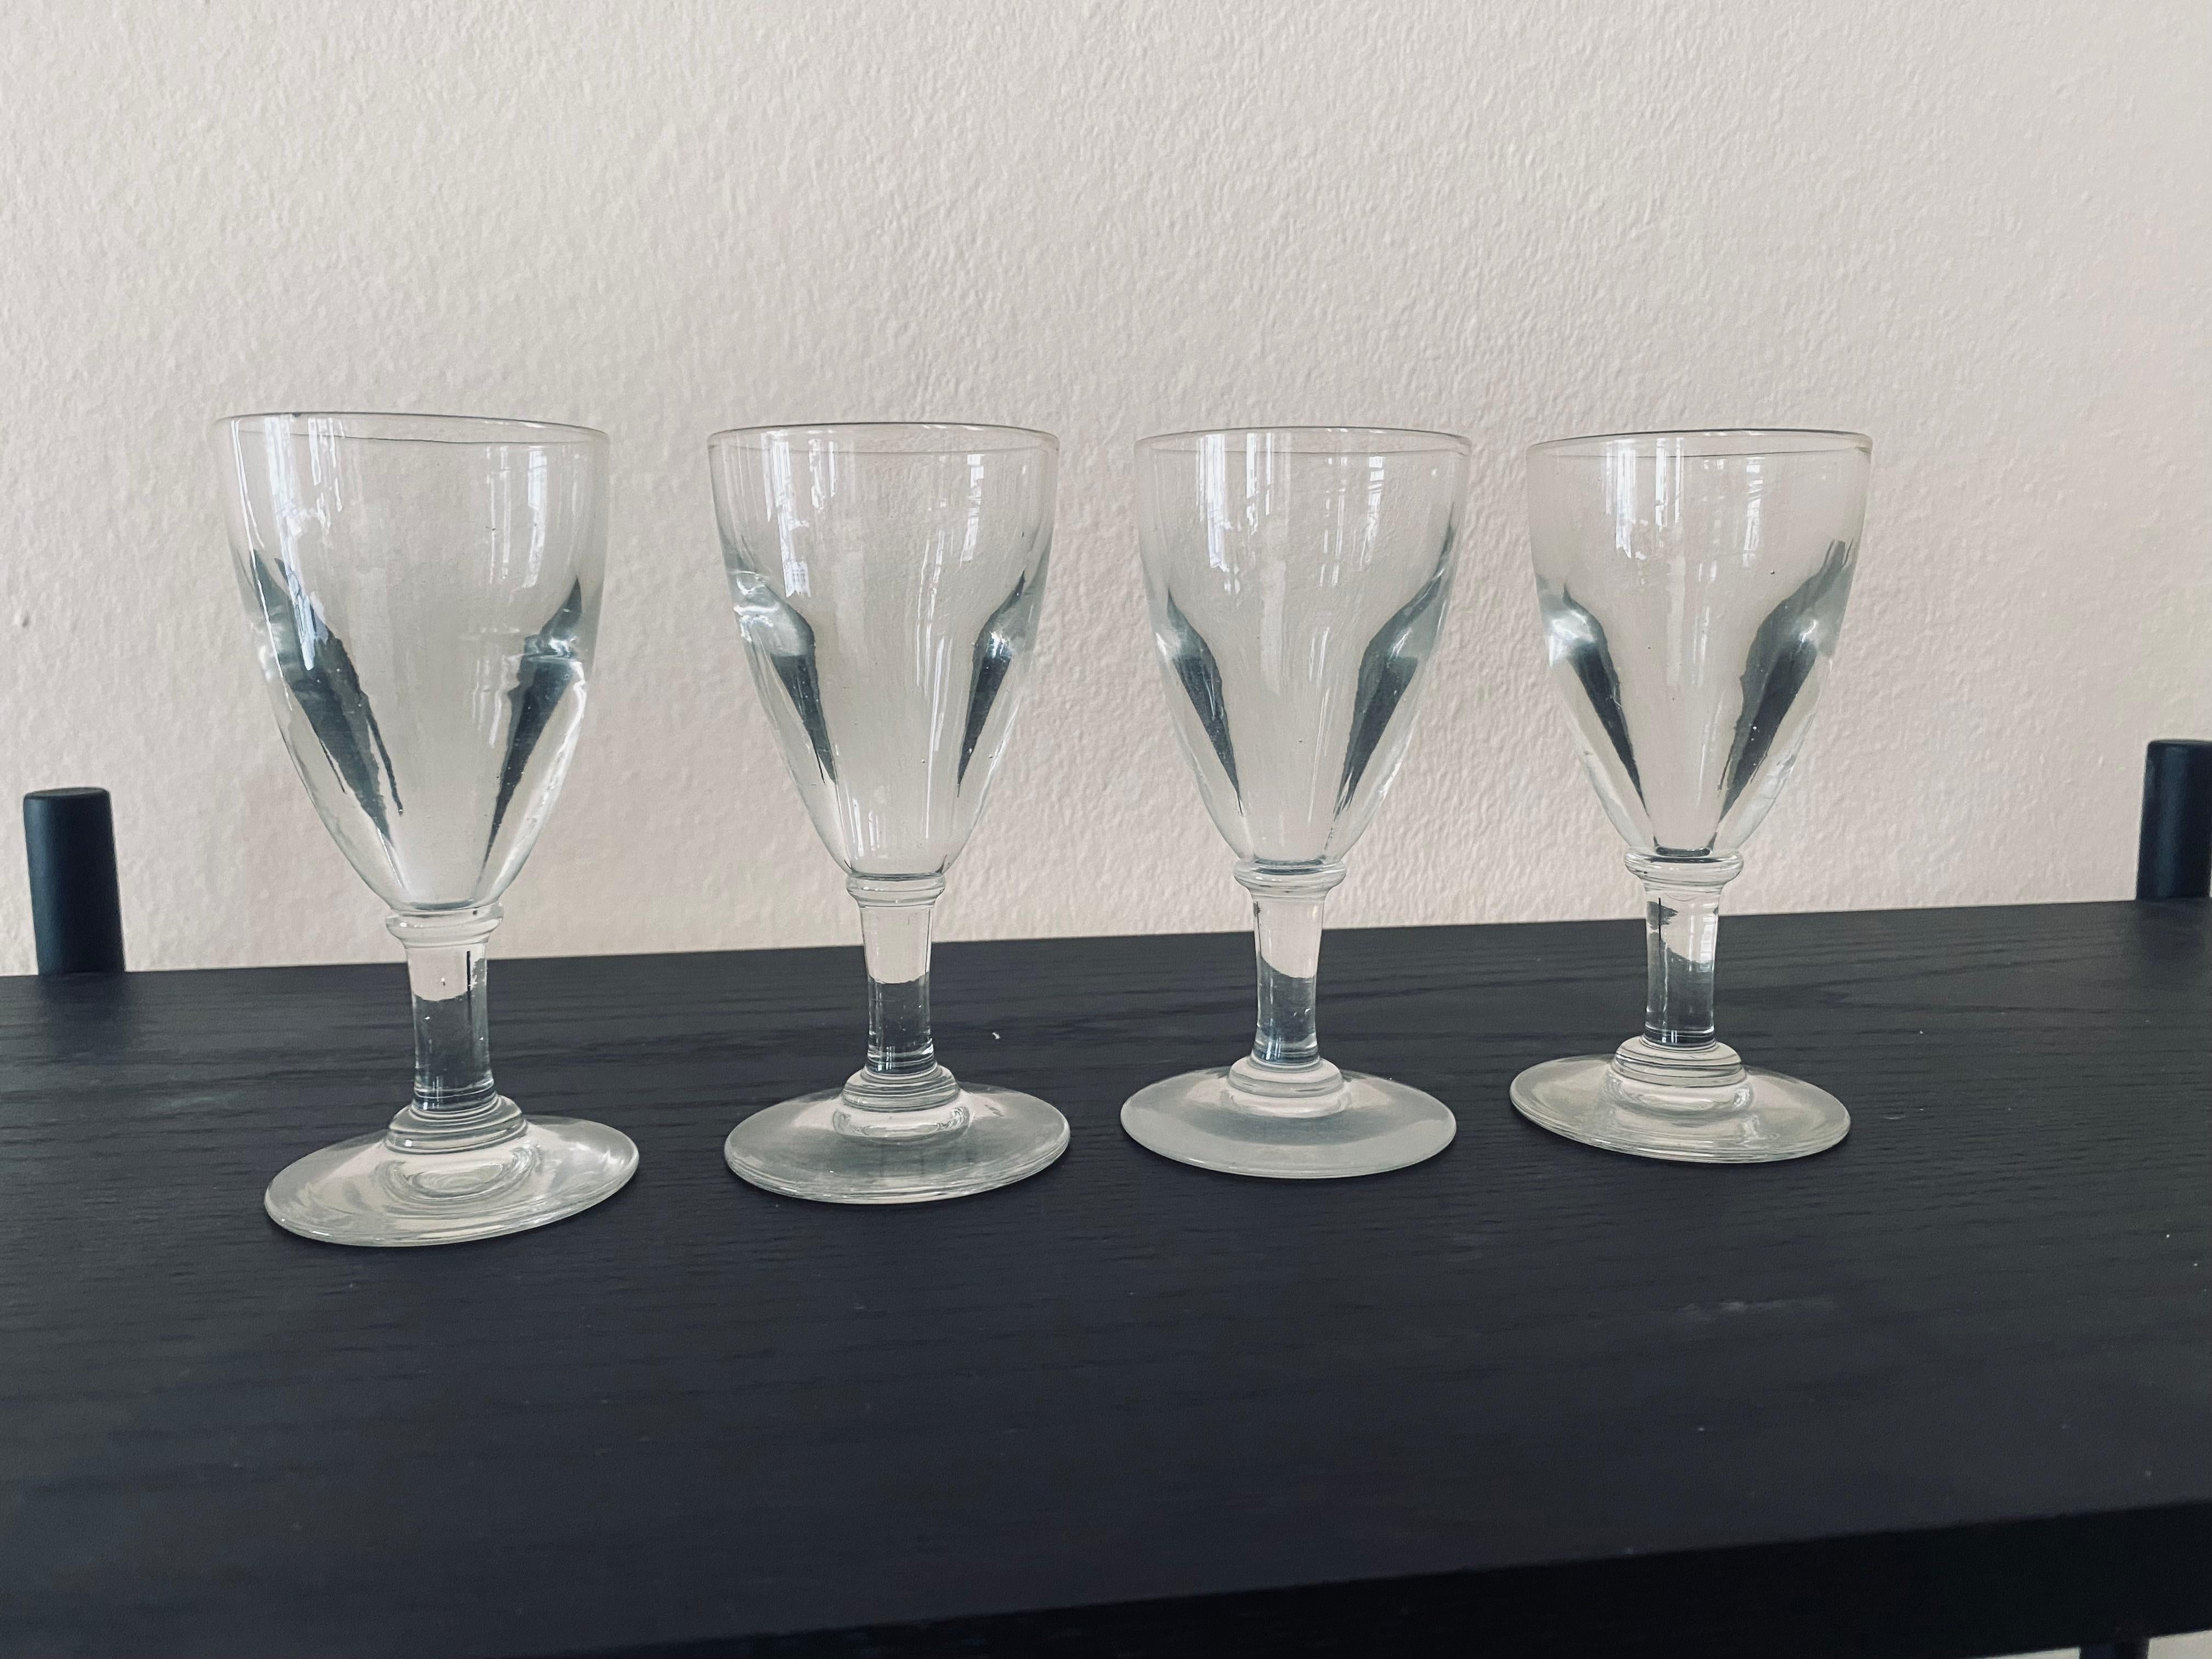 Introducing our exquisite set of 4 Pasties glasses from France, dating back to the enchanting era of 1900. Crafted with meticulous artistry, these glasses boast a remarkable weightiness, thanks to the thick, veined antique glass that was expertly